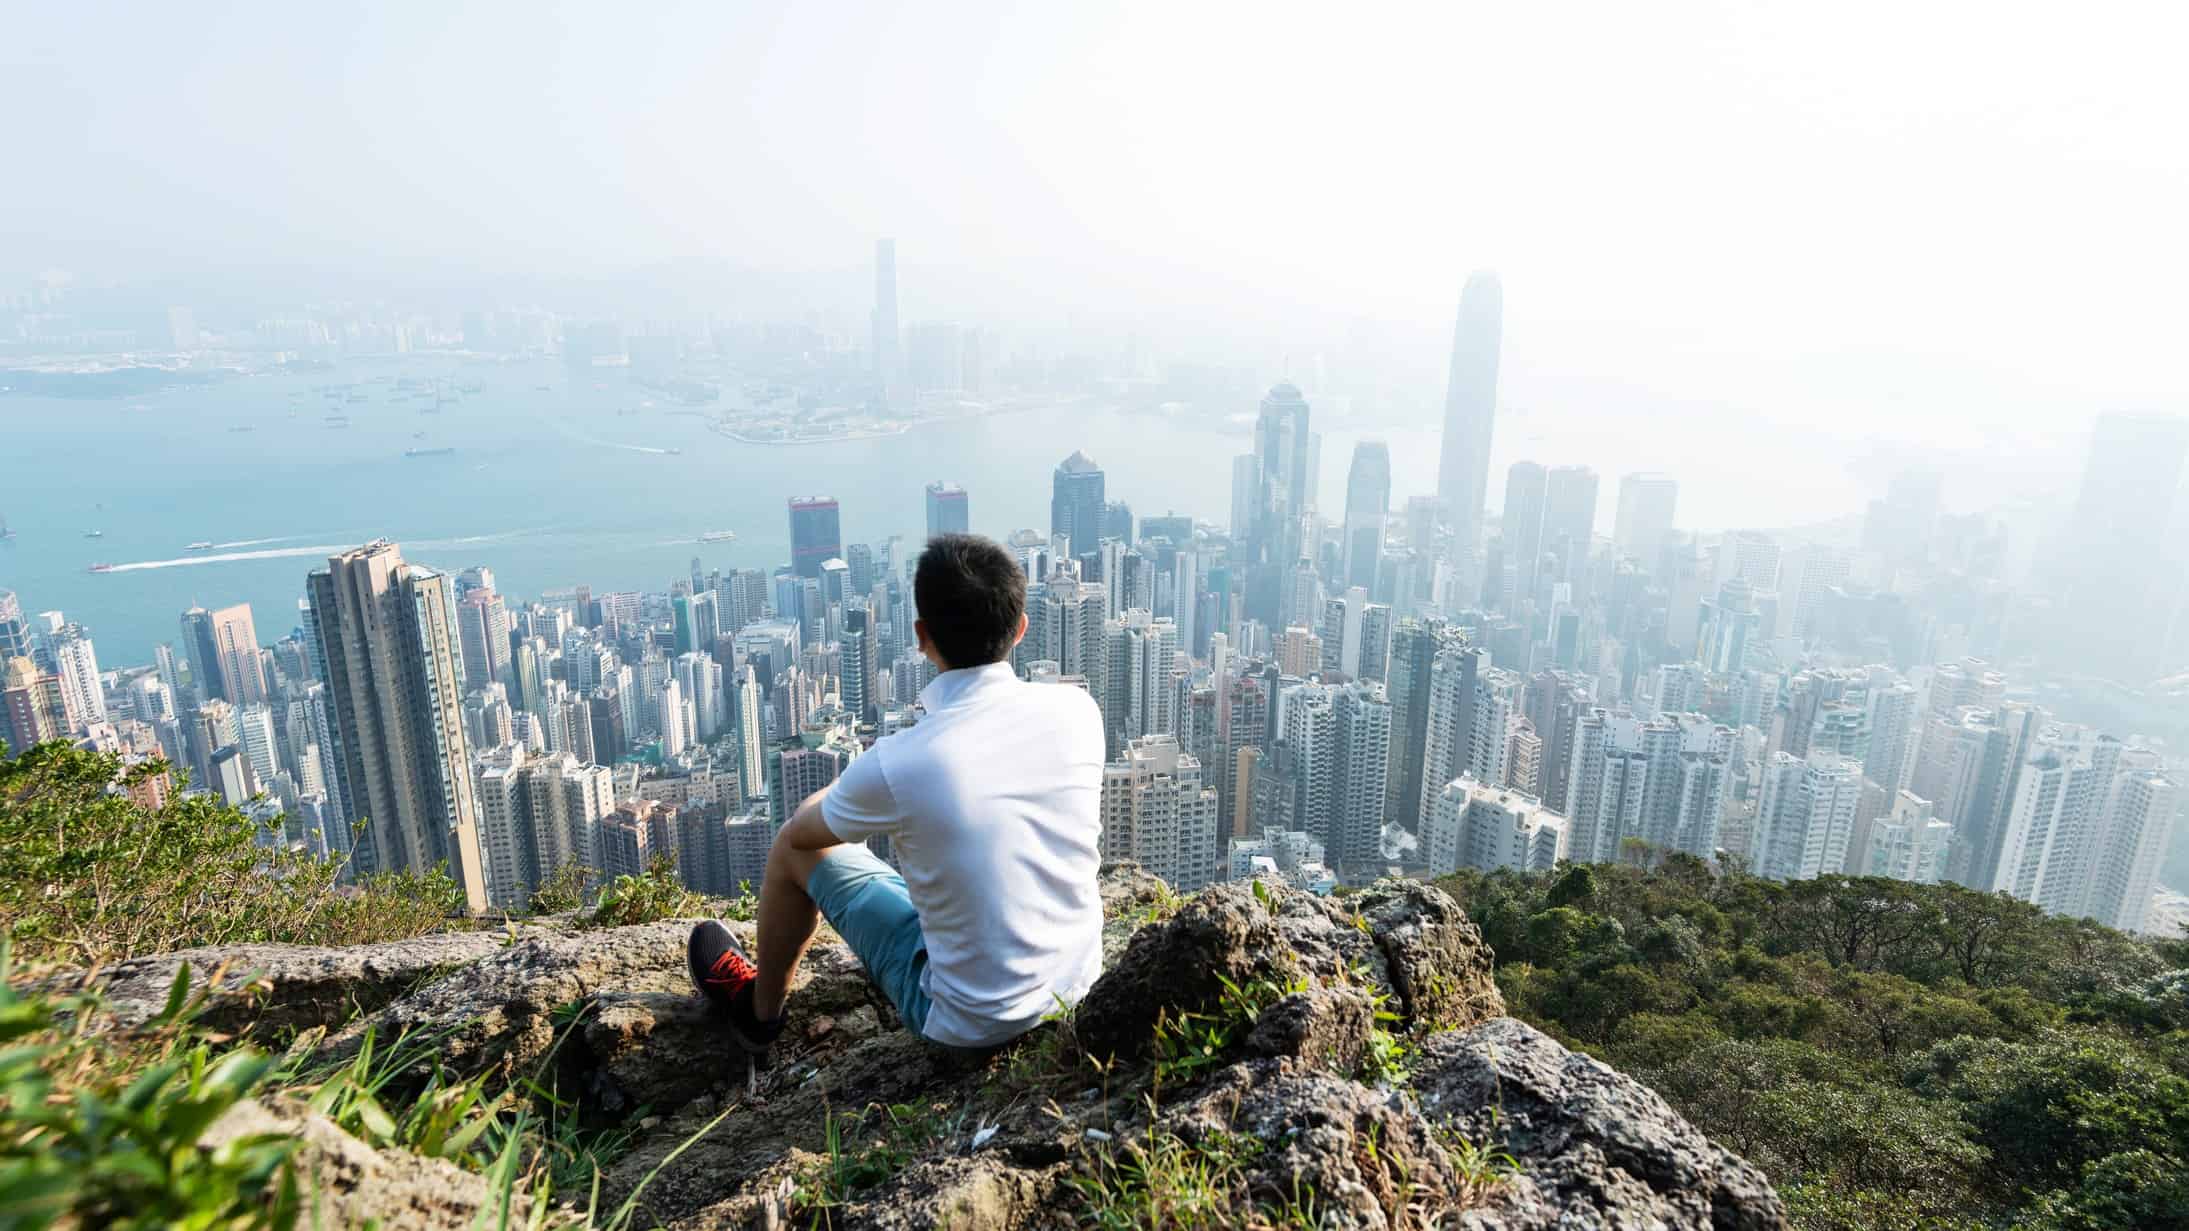 a man sits on a ridge high above a large city full of high rise buildings as though he is thinking, contemplating the vista below.